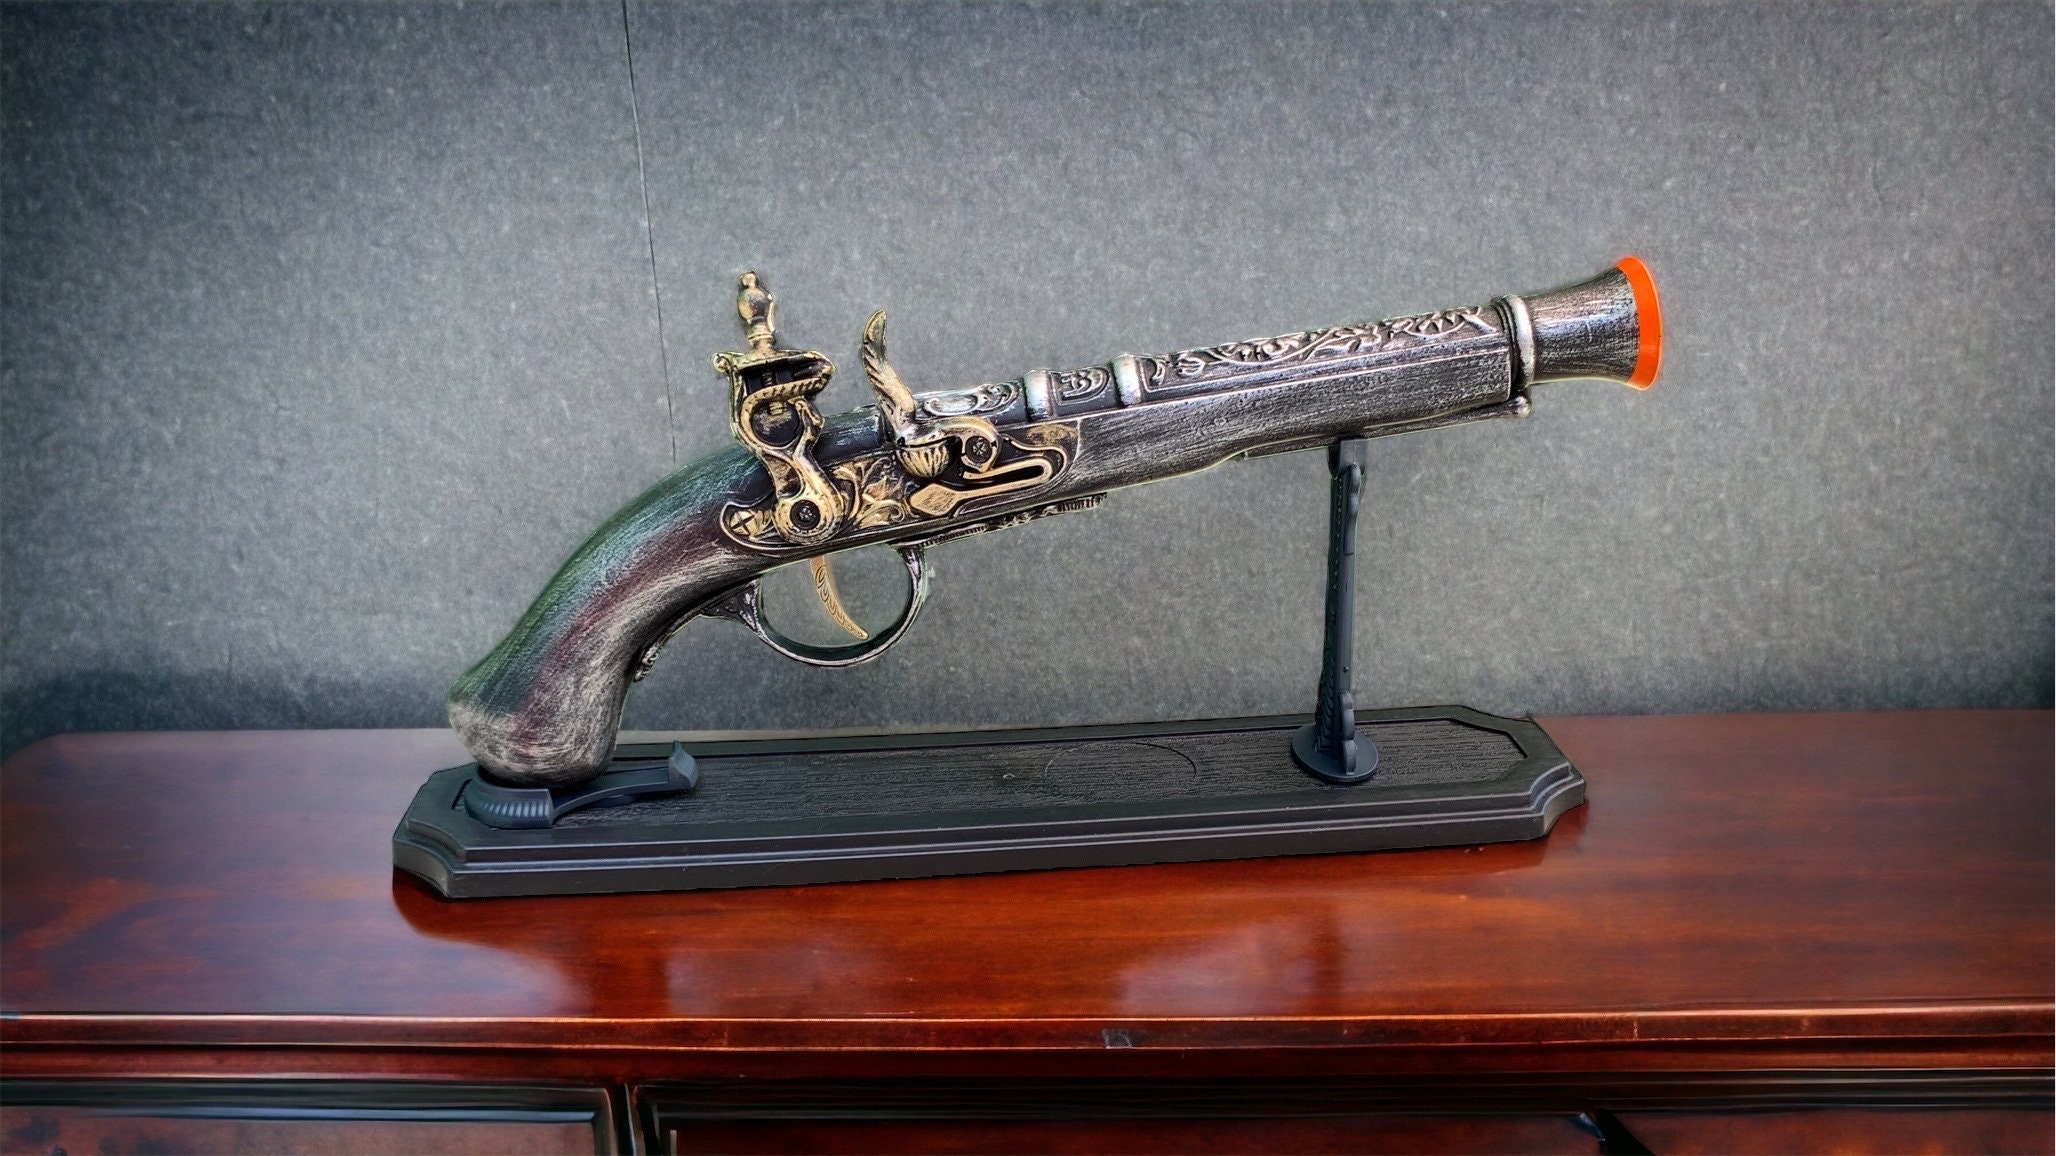 Treasures from Our West: Royal blunderbuss